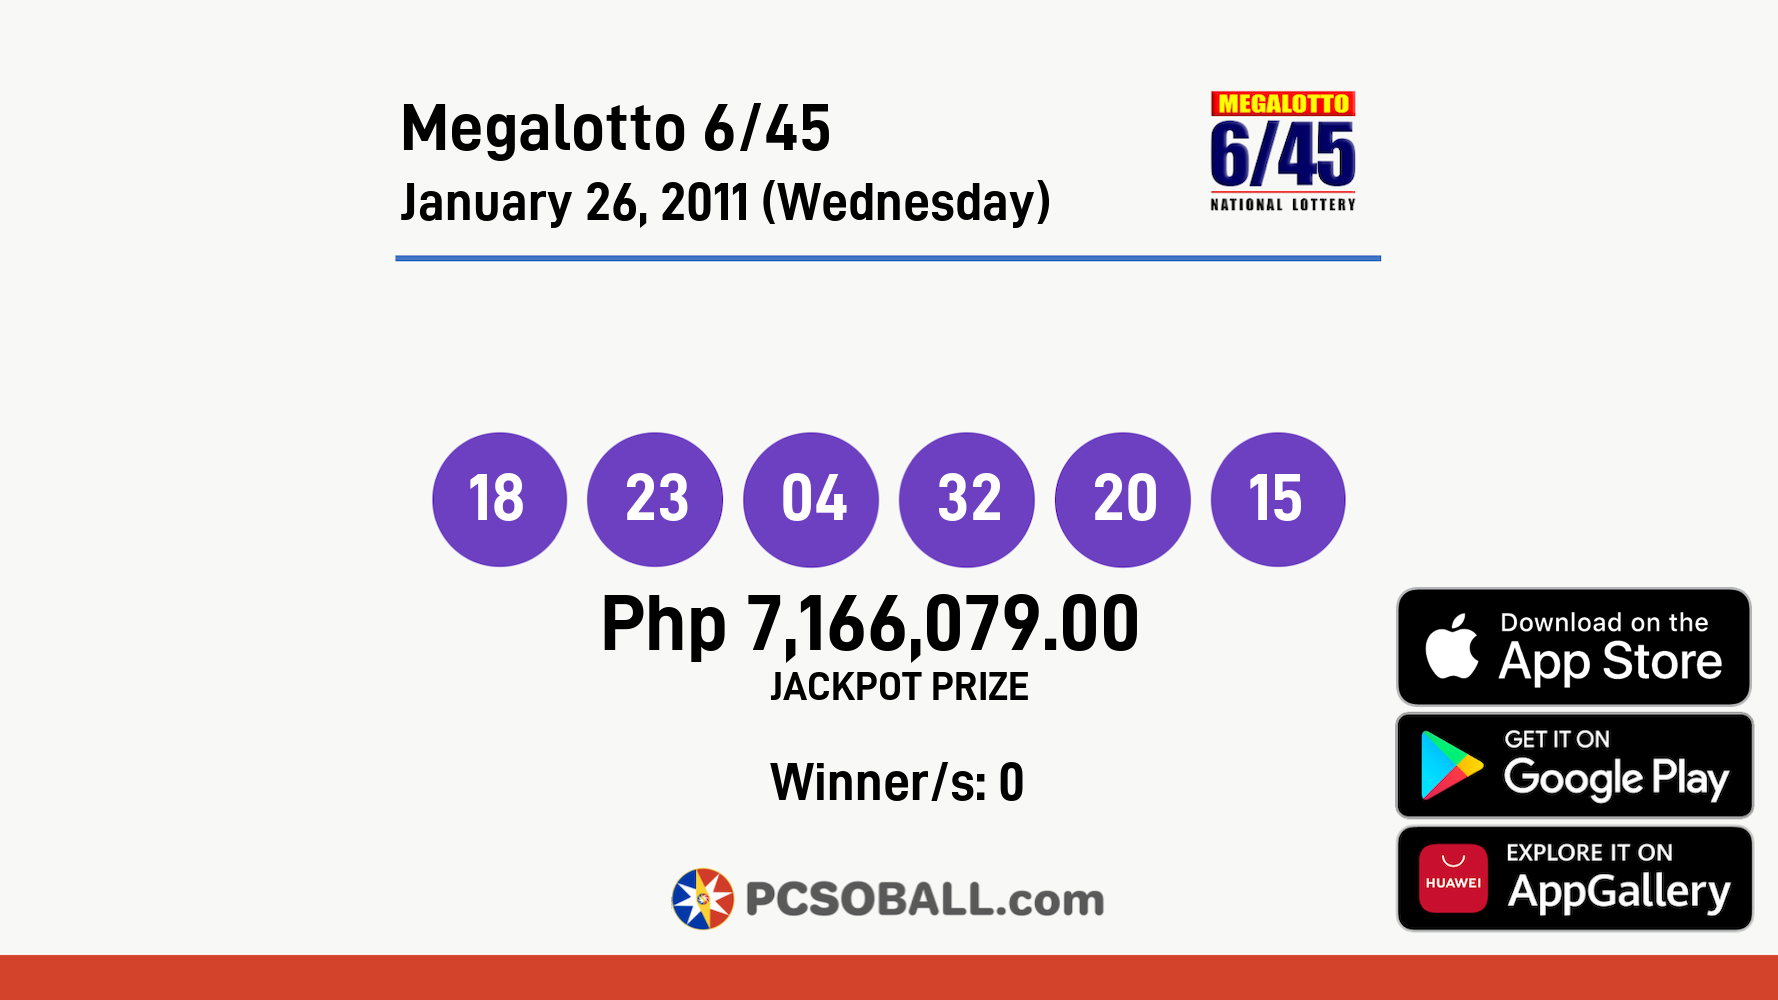 Megalotto 6/45 January 26, 2011 (Wednesday) Result